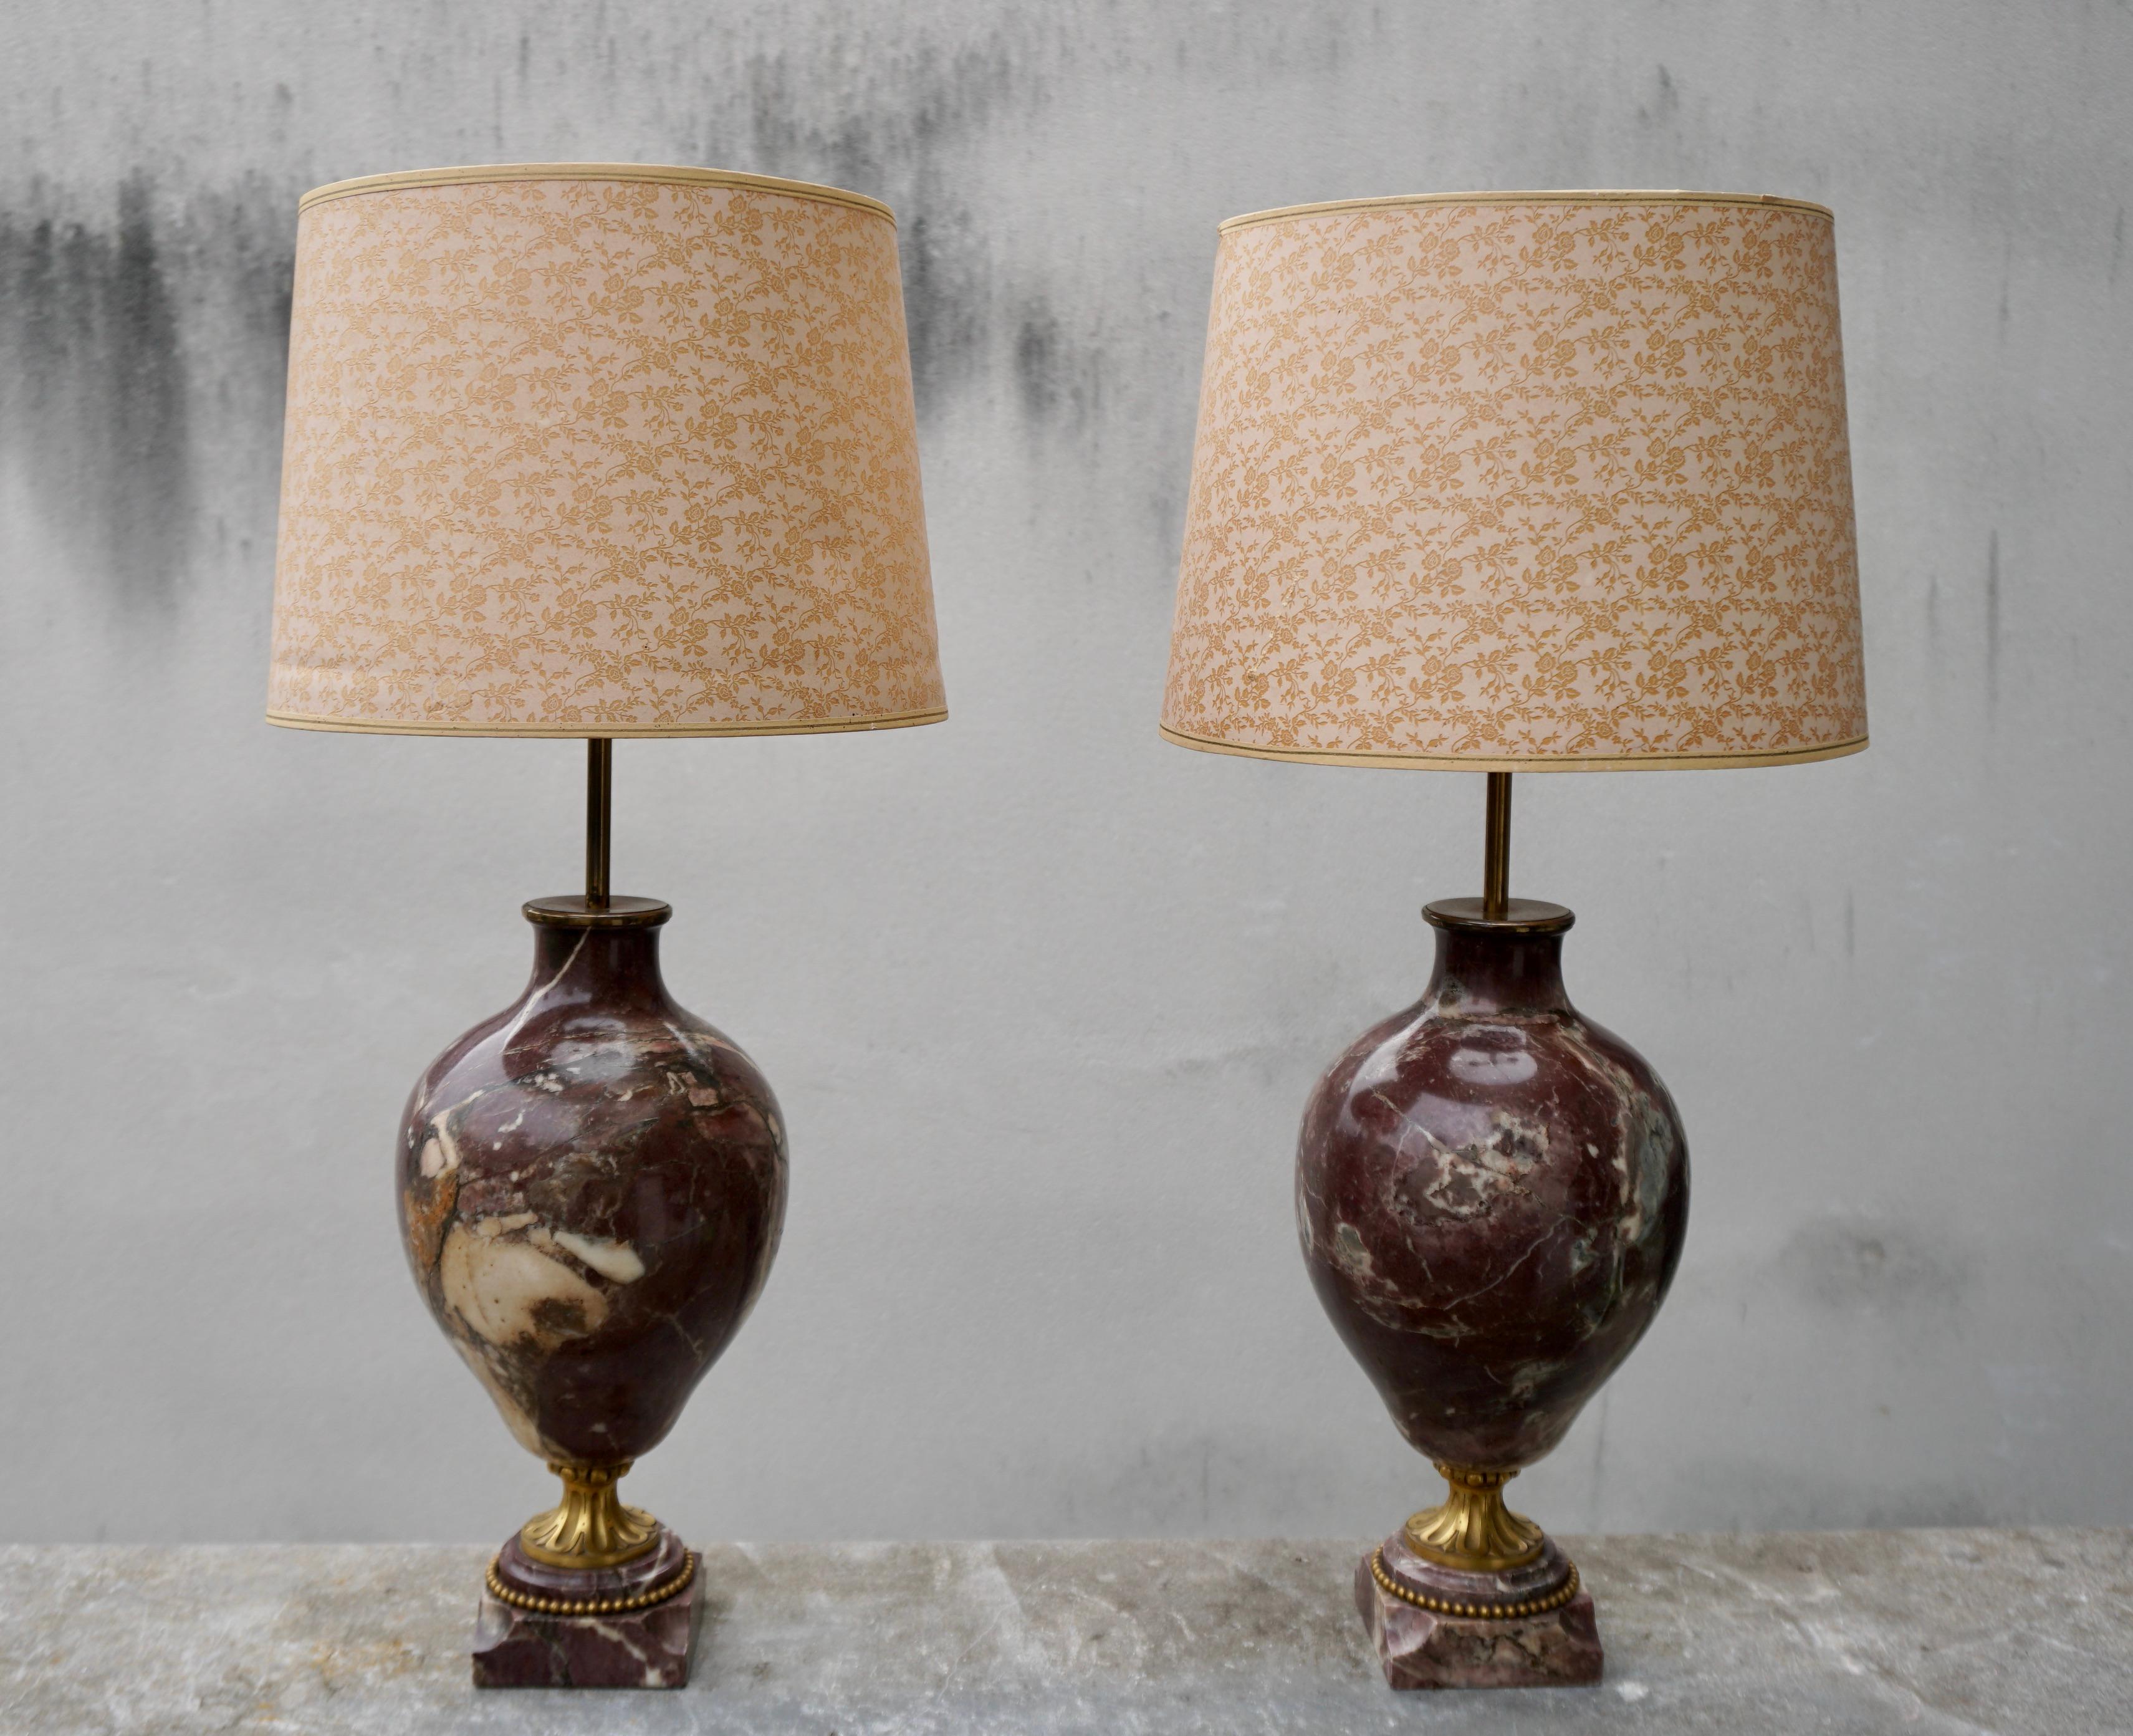 Hollywood Regency Pair of 19th Century French Red Marble and Bronze Cassolettes Table Lamps For Sale